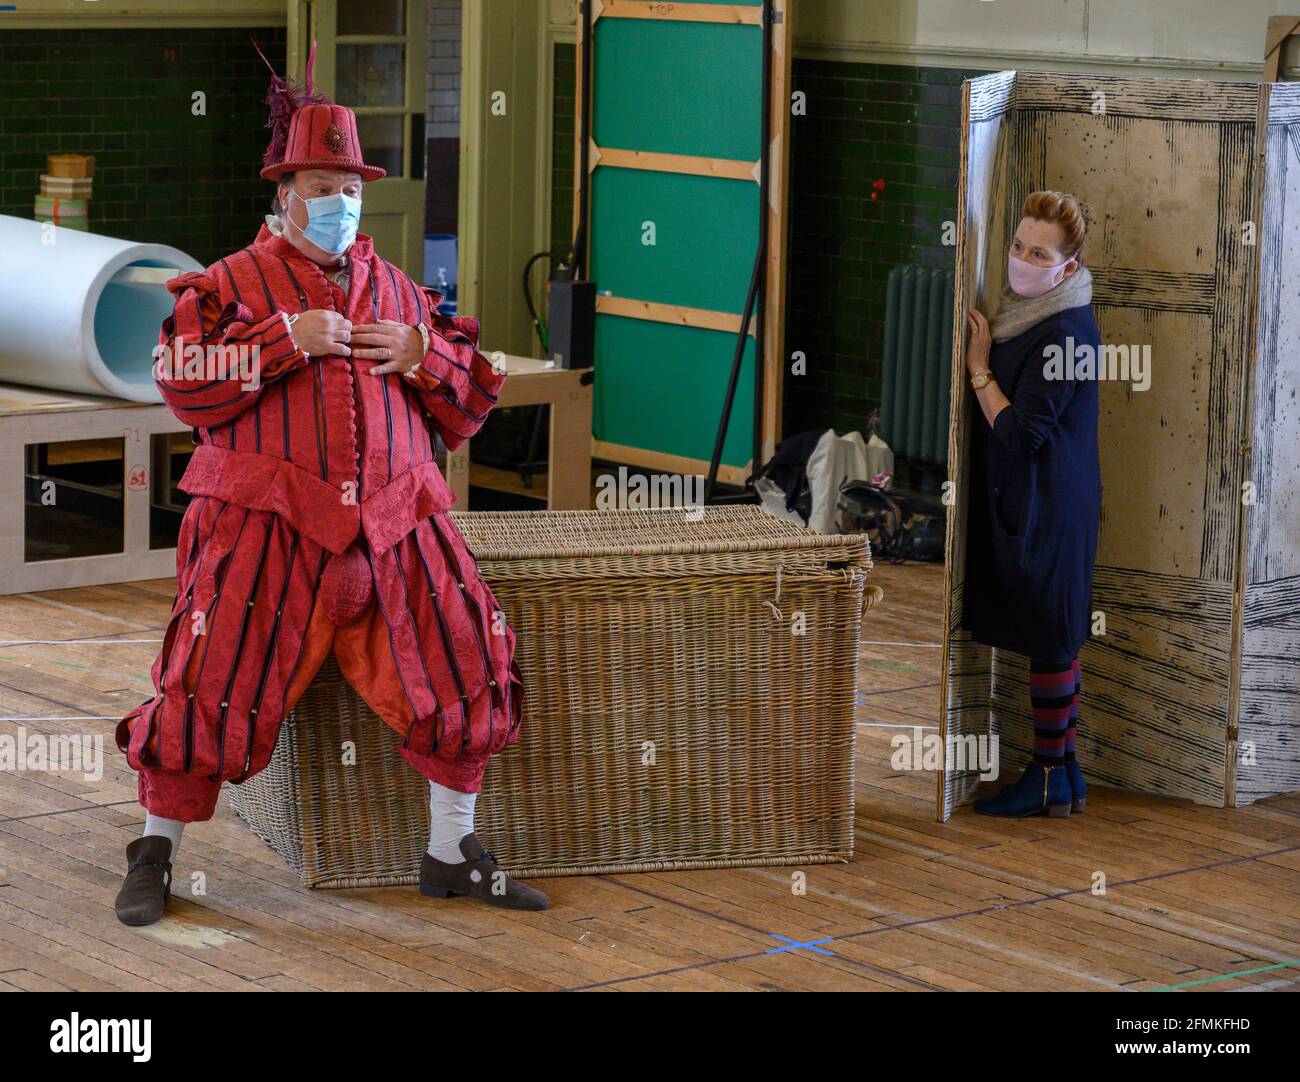 Alford House, London, UK. 10 May 2021. Rehearsals take place in central London for Grange Park Opera Surrey production of Verdi’s comic opera Falstaff with Bryn Terfel and Janis Kelly in masks. The opera starts on 10 June at Grange Park in Surrey and is sold out. Credit: Malcolm Park/Alamy Live News. Stock Photo